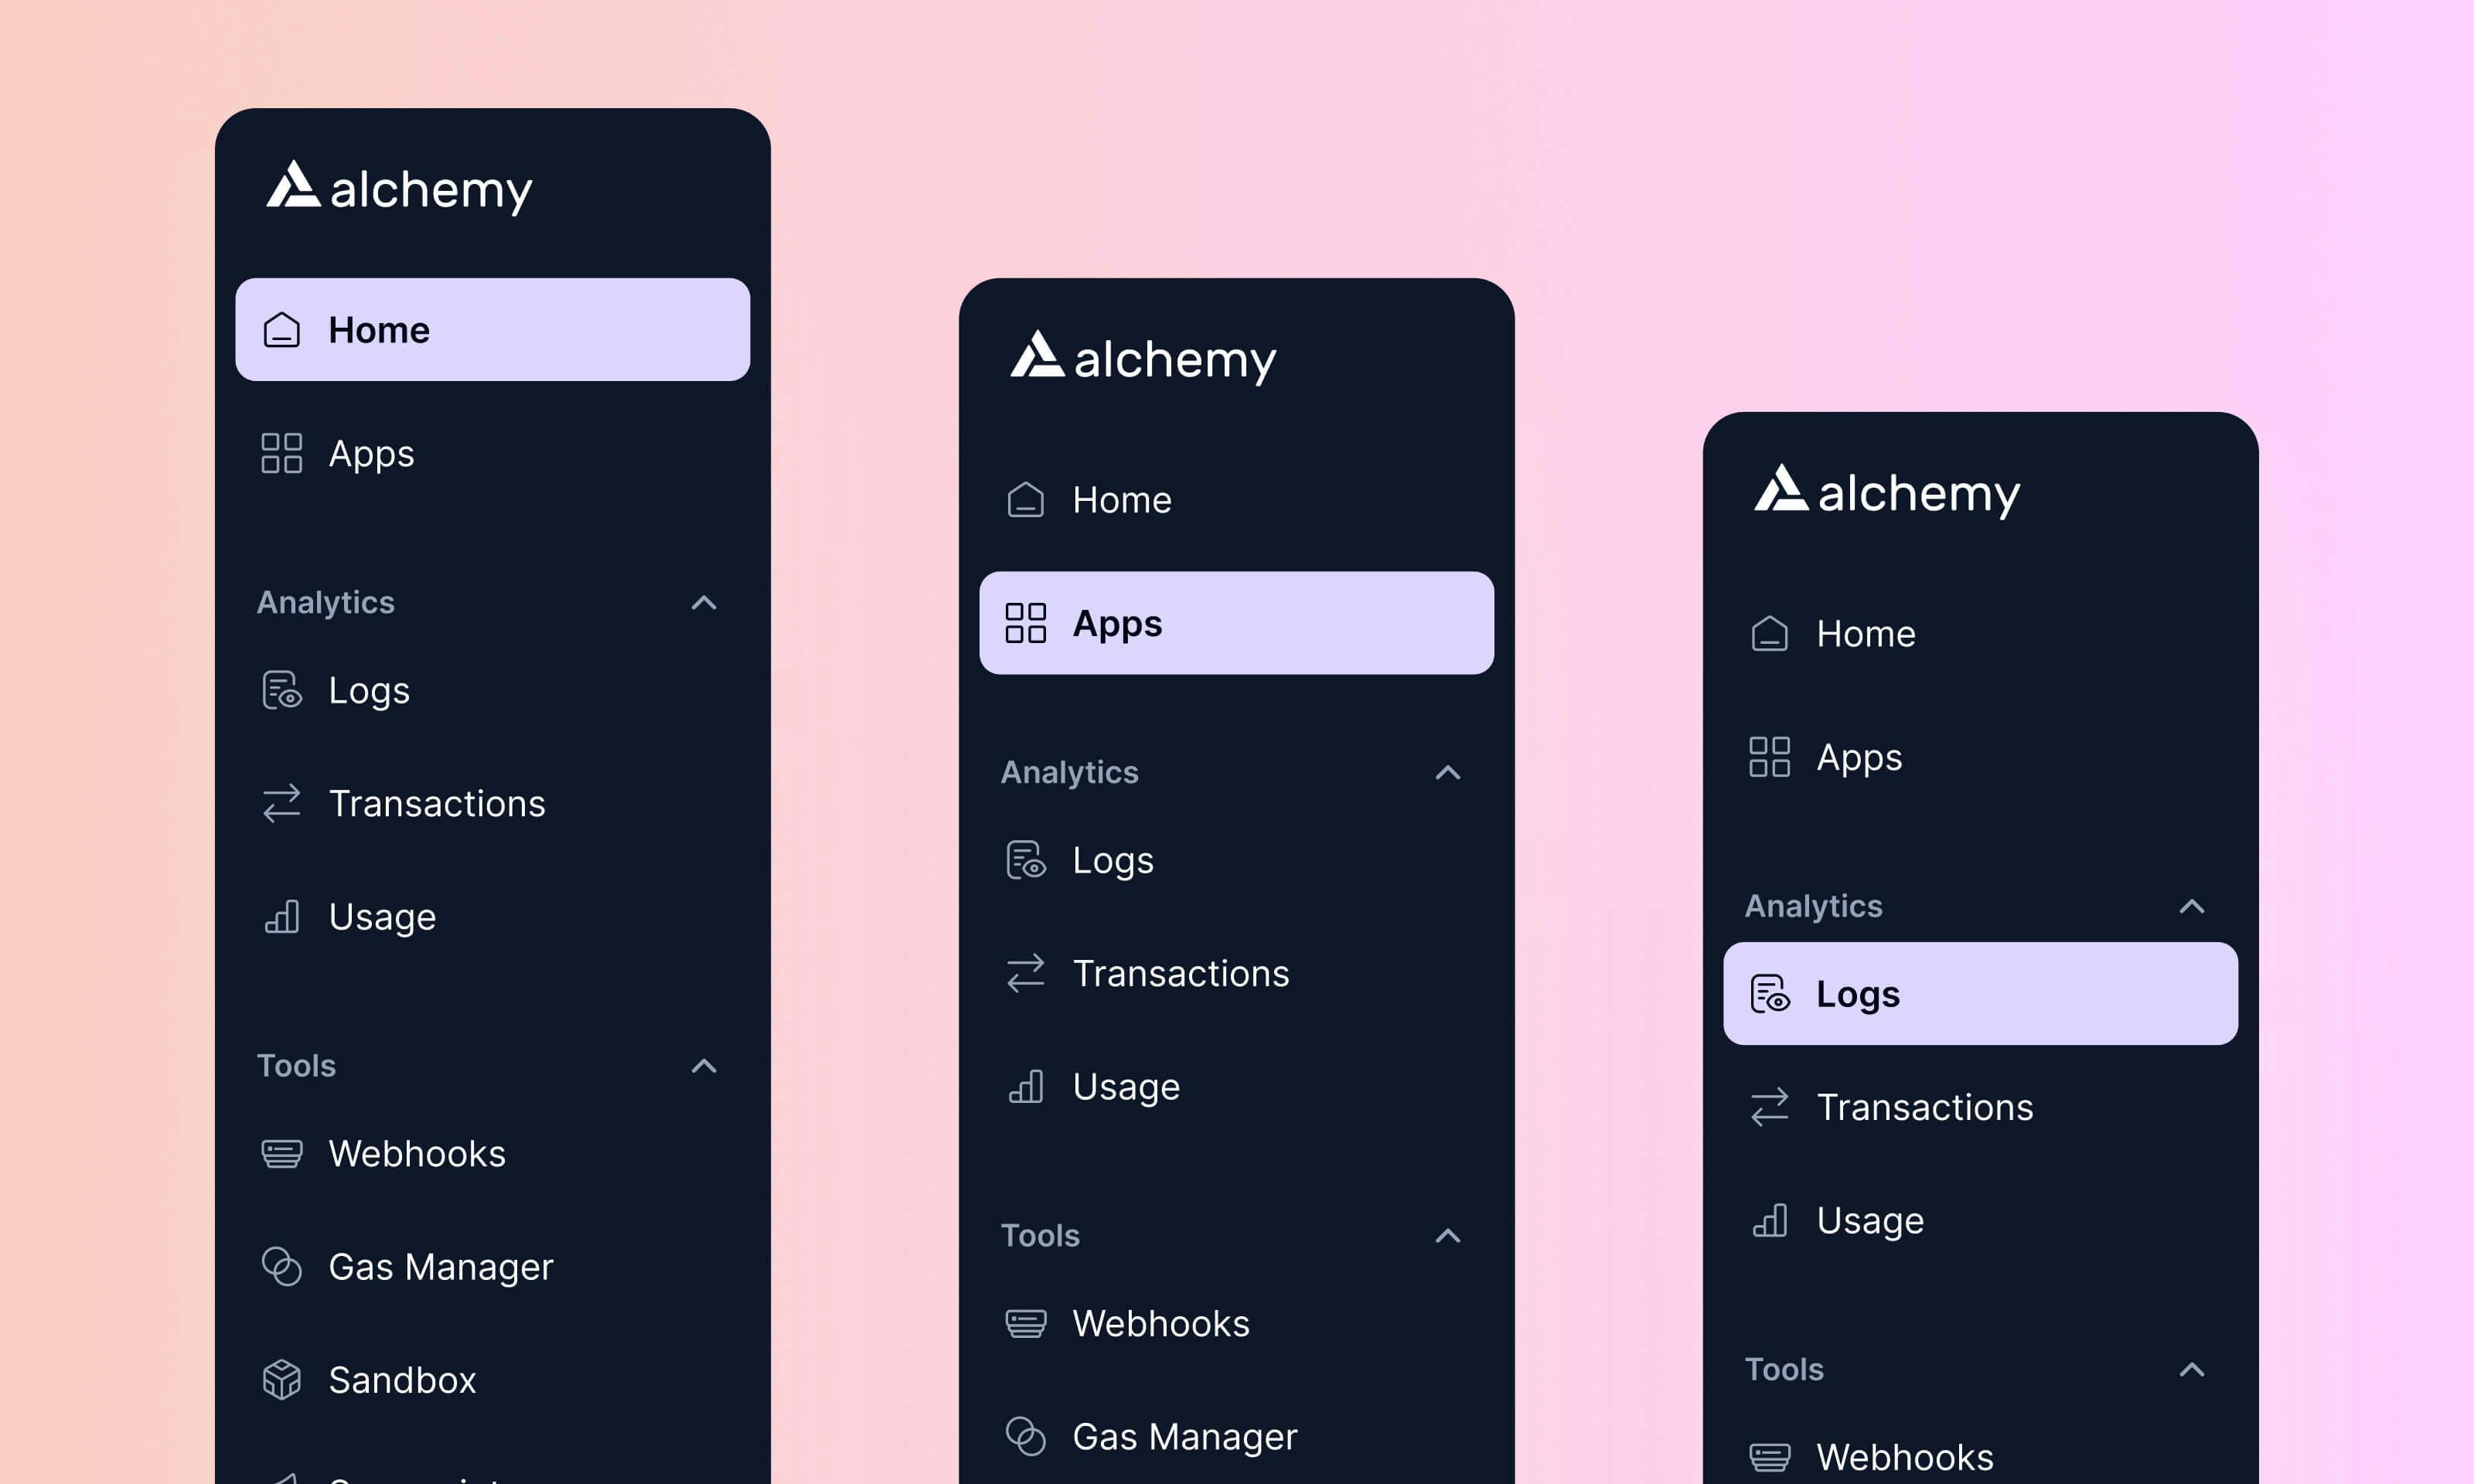 Alchemy's improved and more intuitive navigation